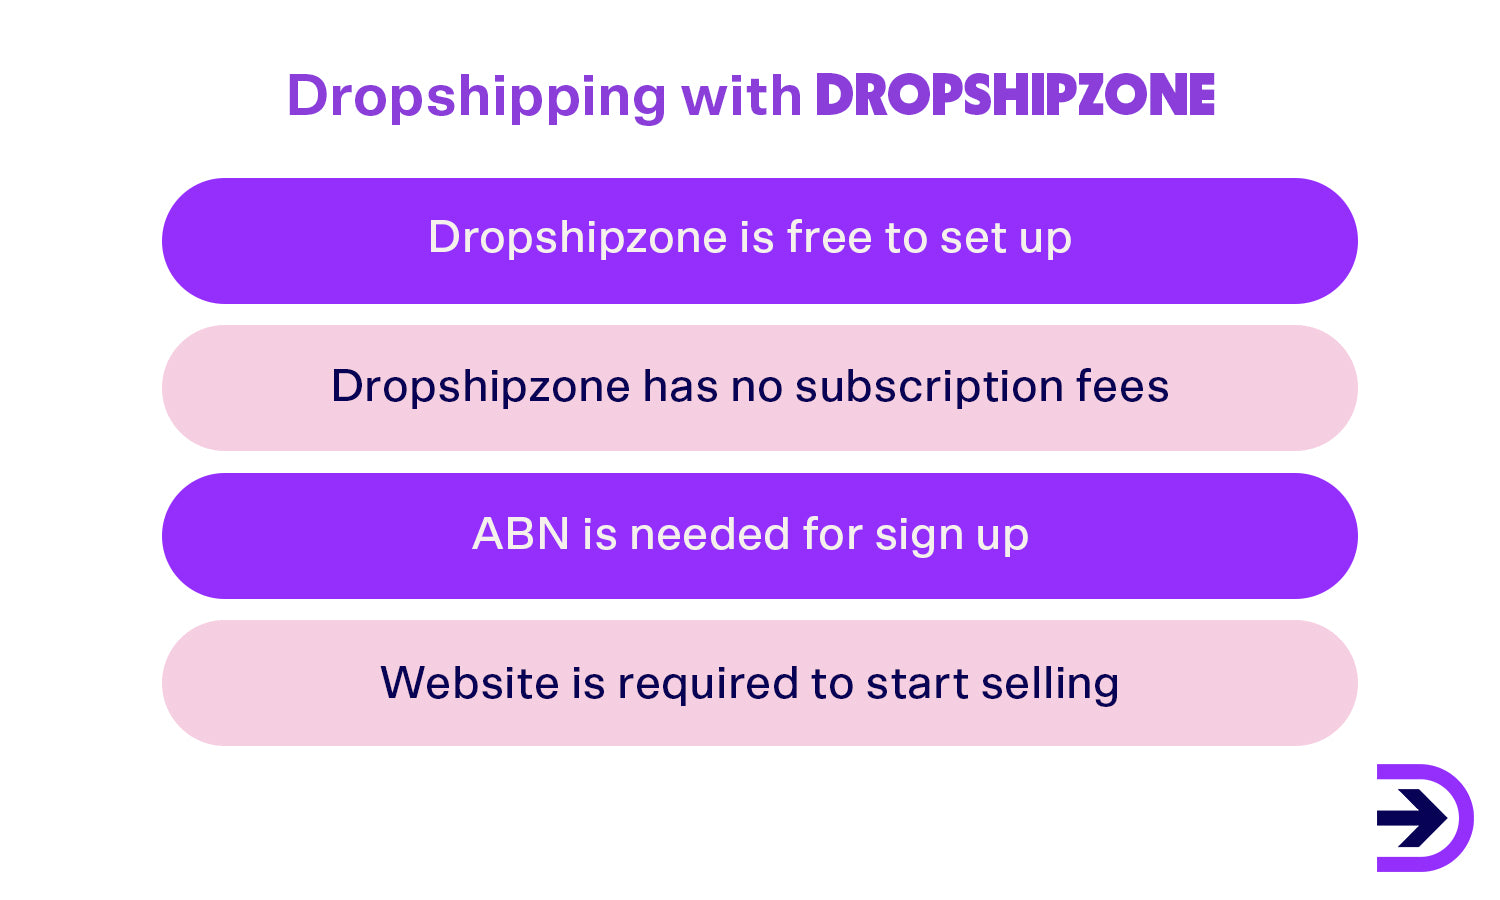 Dropshipzone offers retailers the opportunity to dropship without subscription fees.